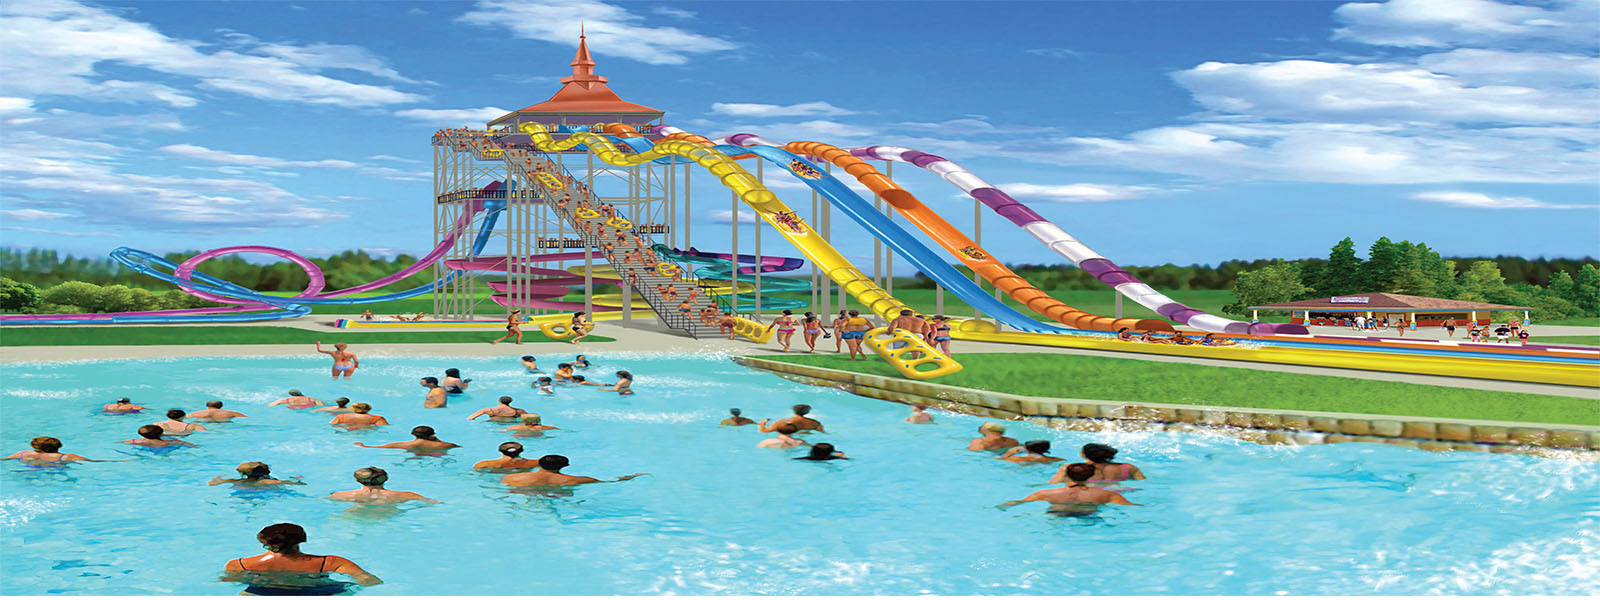 calypso-theme-waterpark-mtlpages